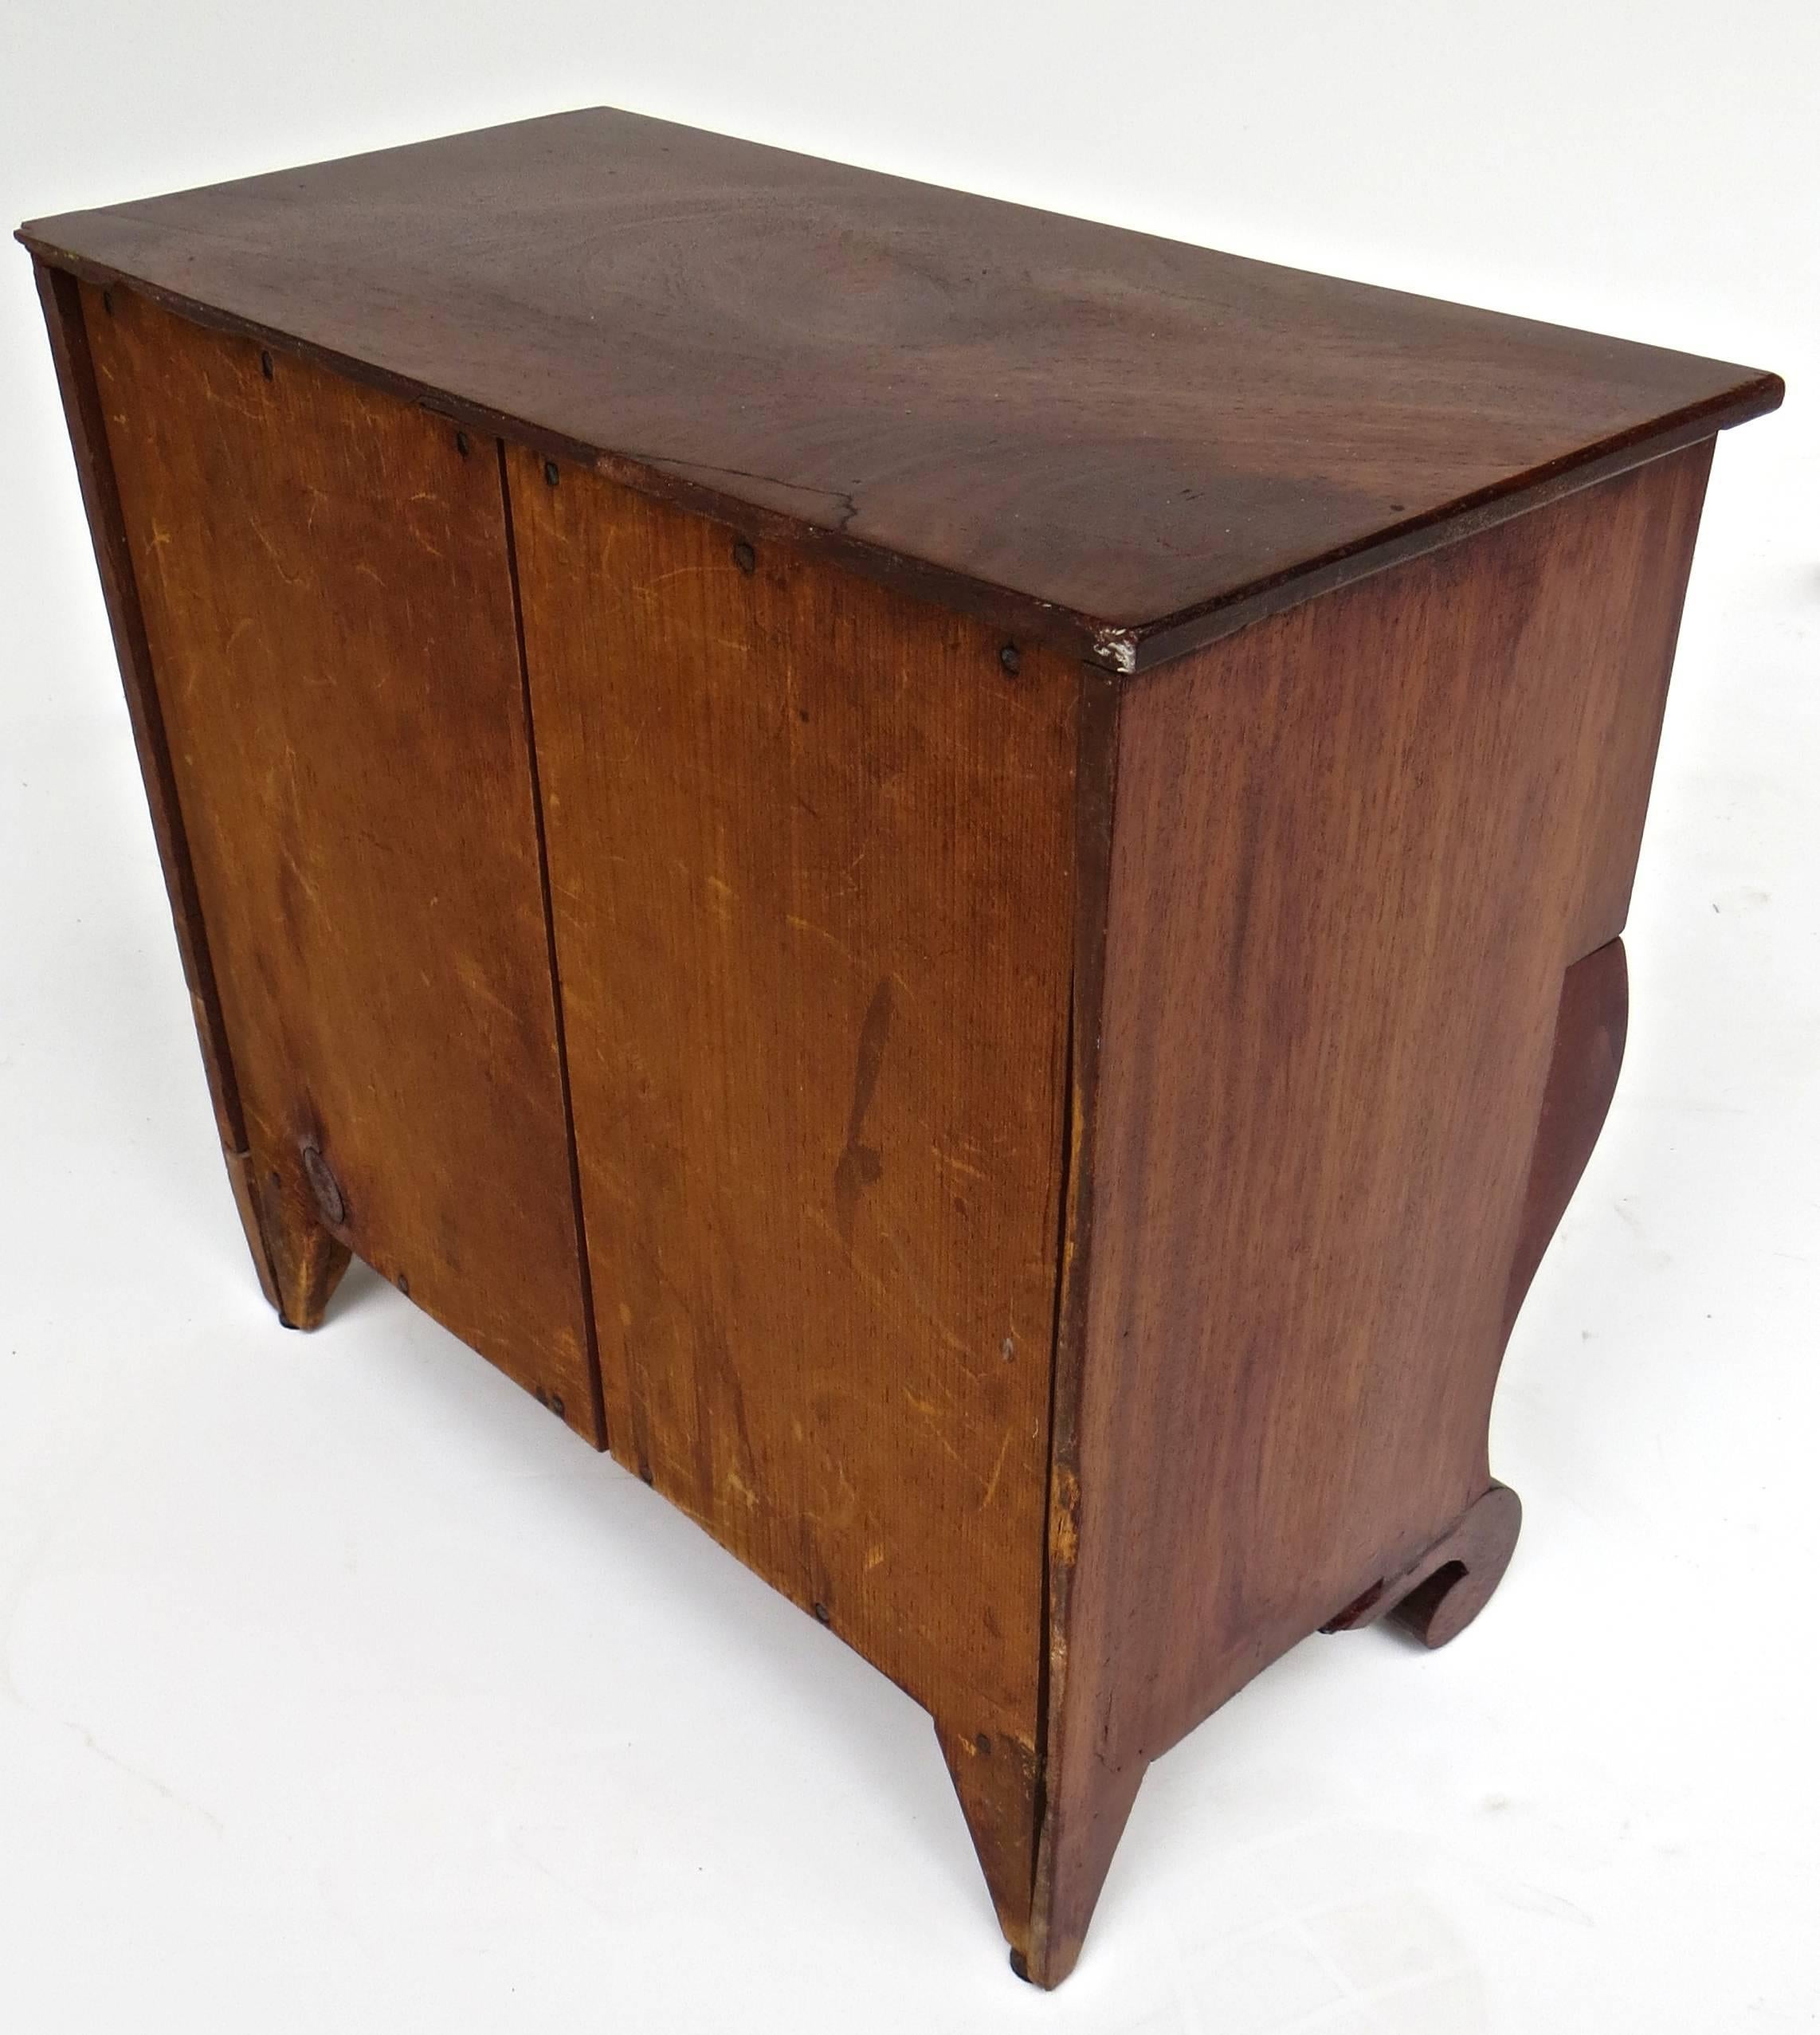 Wood 19th Century American Empire Miniature Chest (possibly Thomas Day)